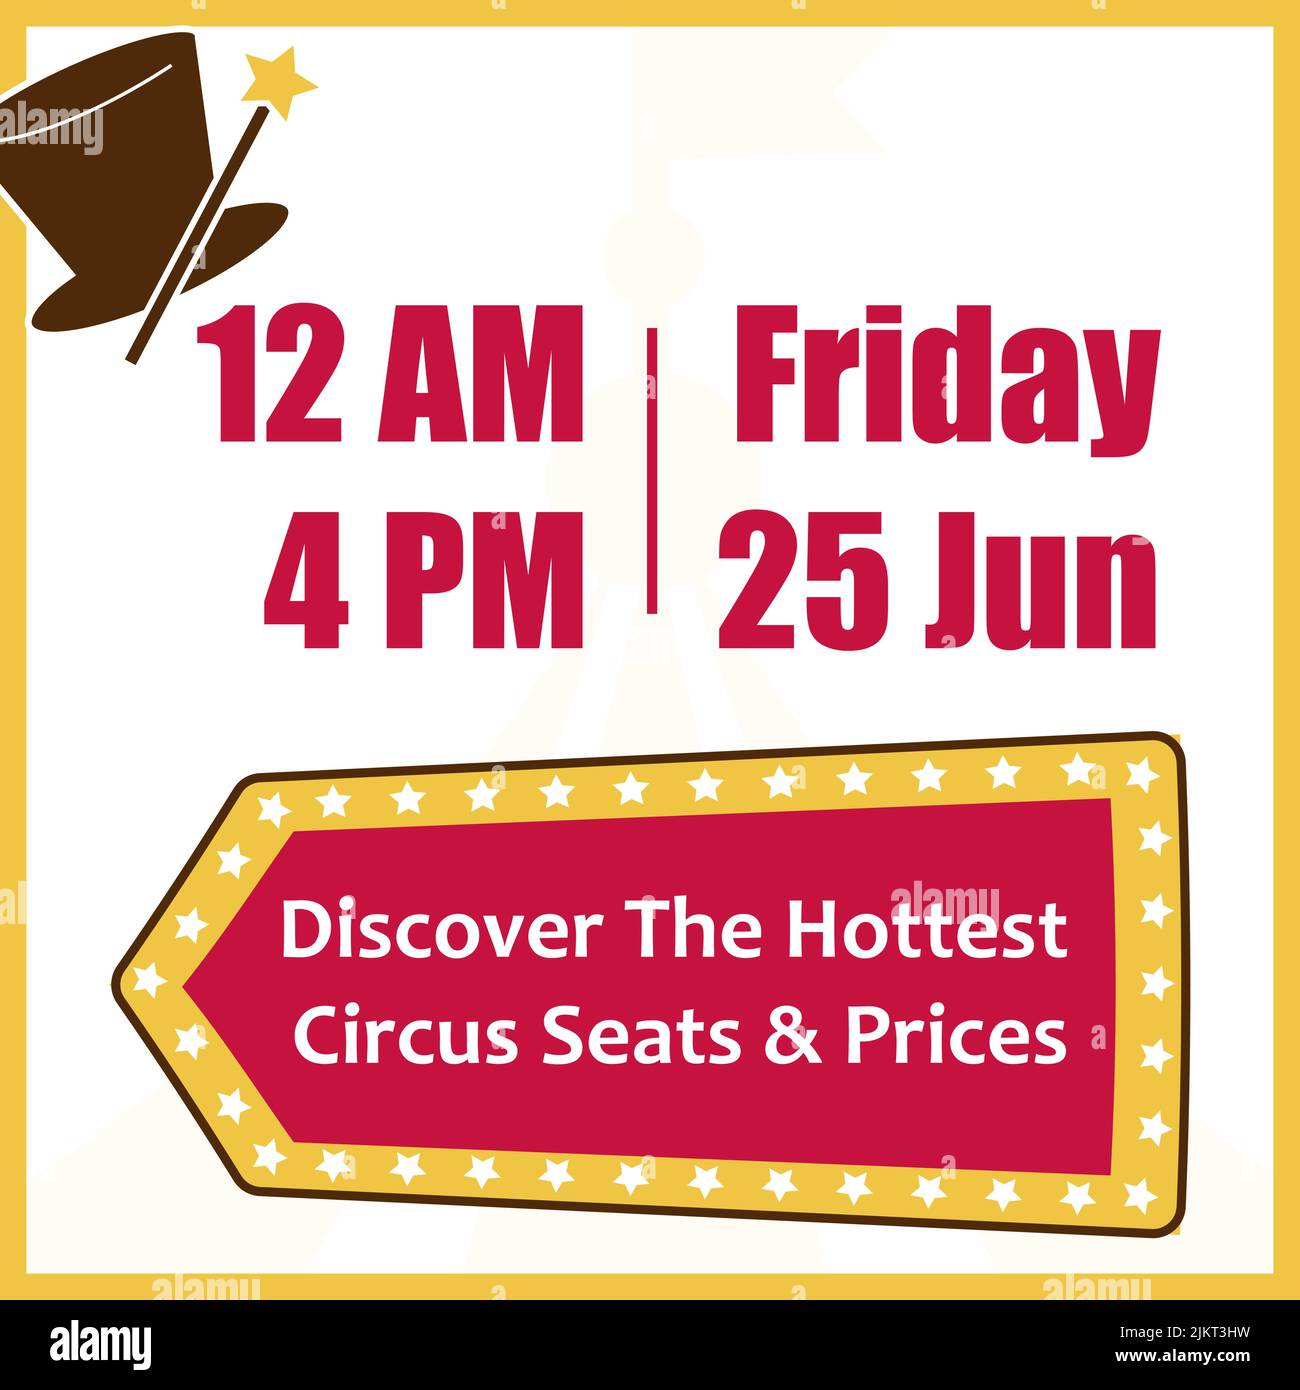 Discover hottest circus seats and prices, banner Stock Vector